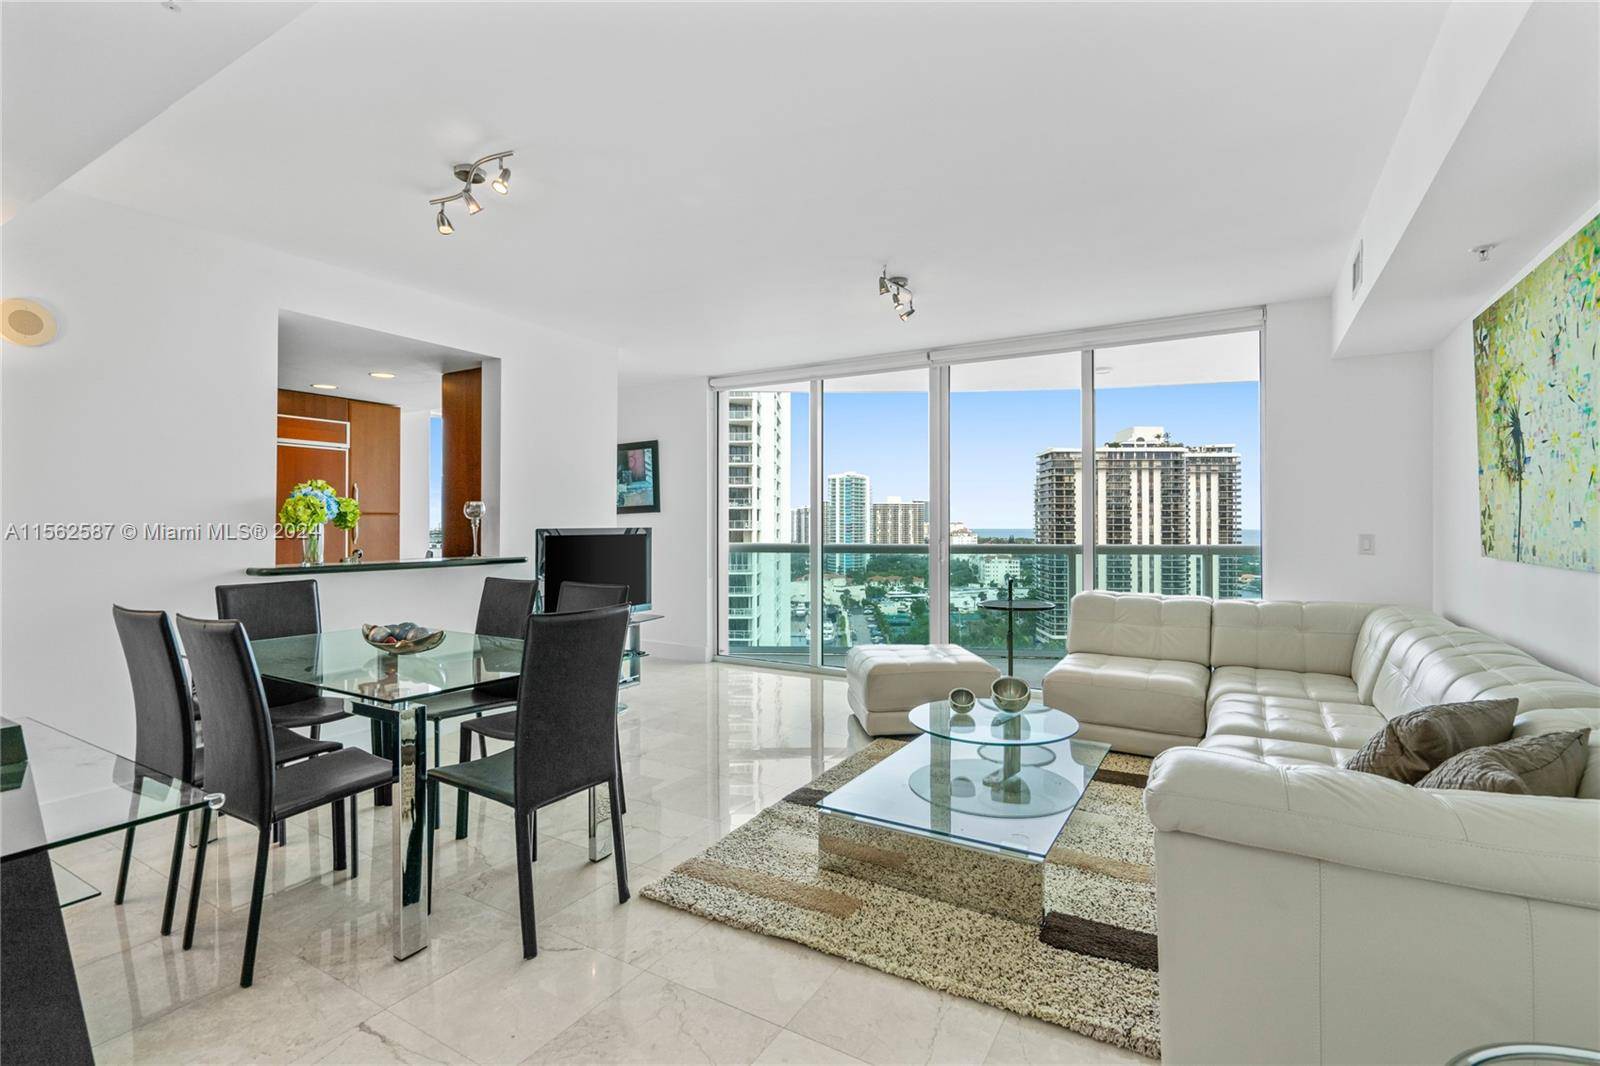 BEAUTIFUL FULLY FURNISHED 2 BEDROOMS PLUS DEN 3RD BEDROOM UNIT IN ONE OF THE BEST BUILDINGS IN AVENTURA.